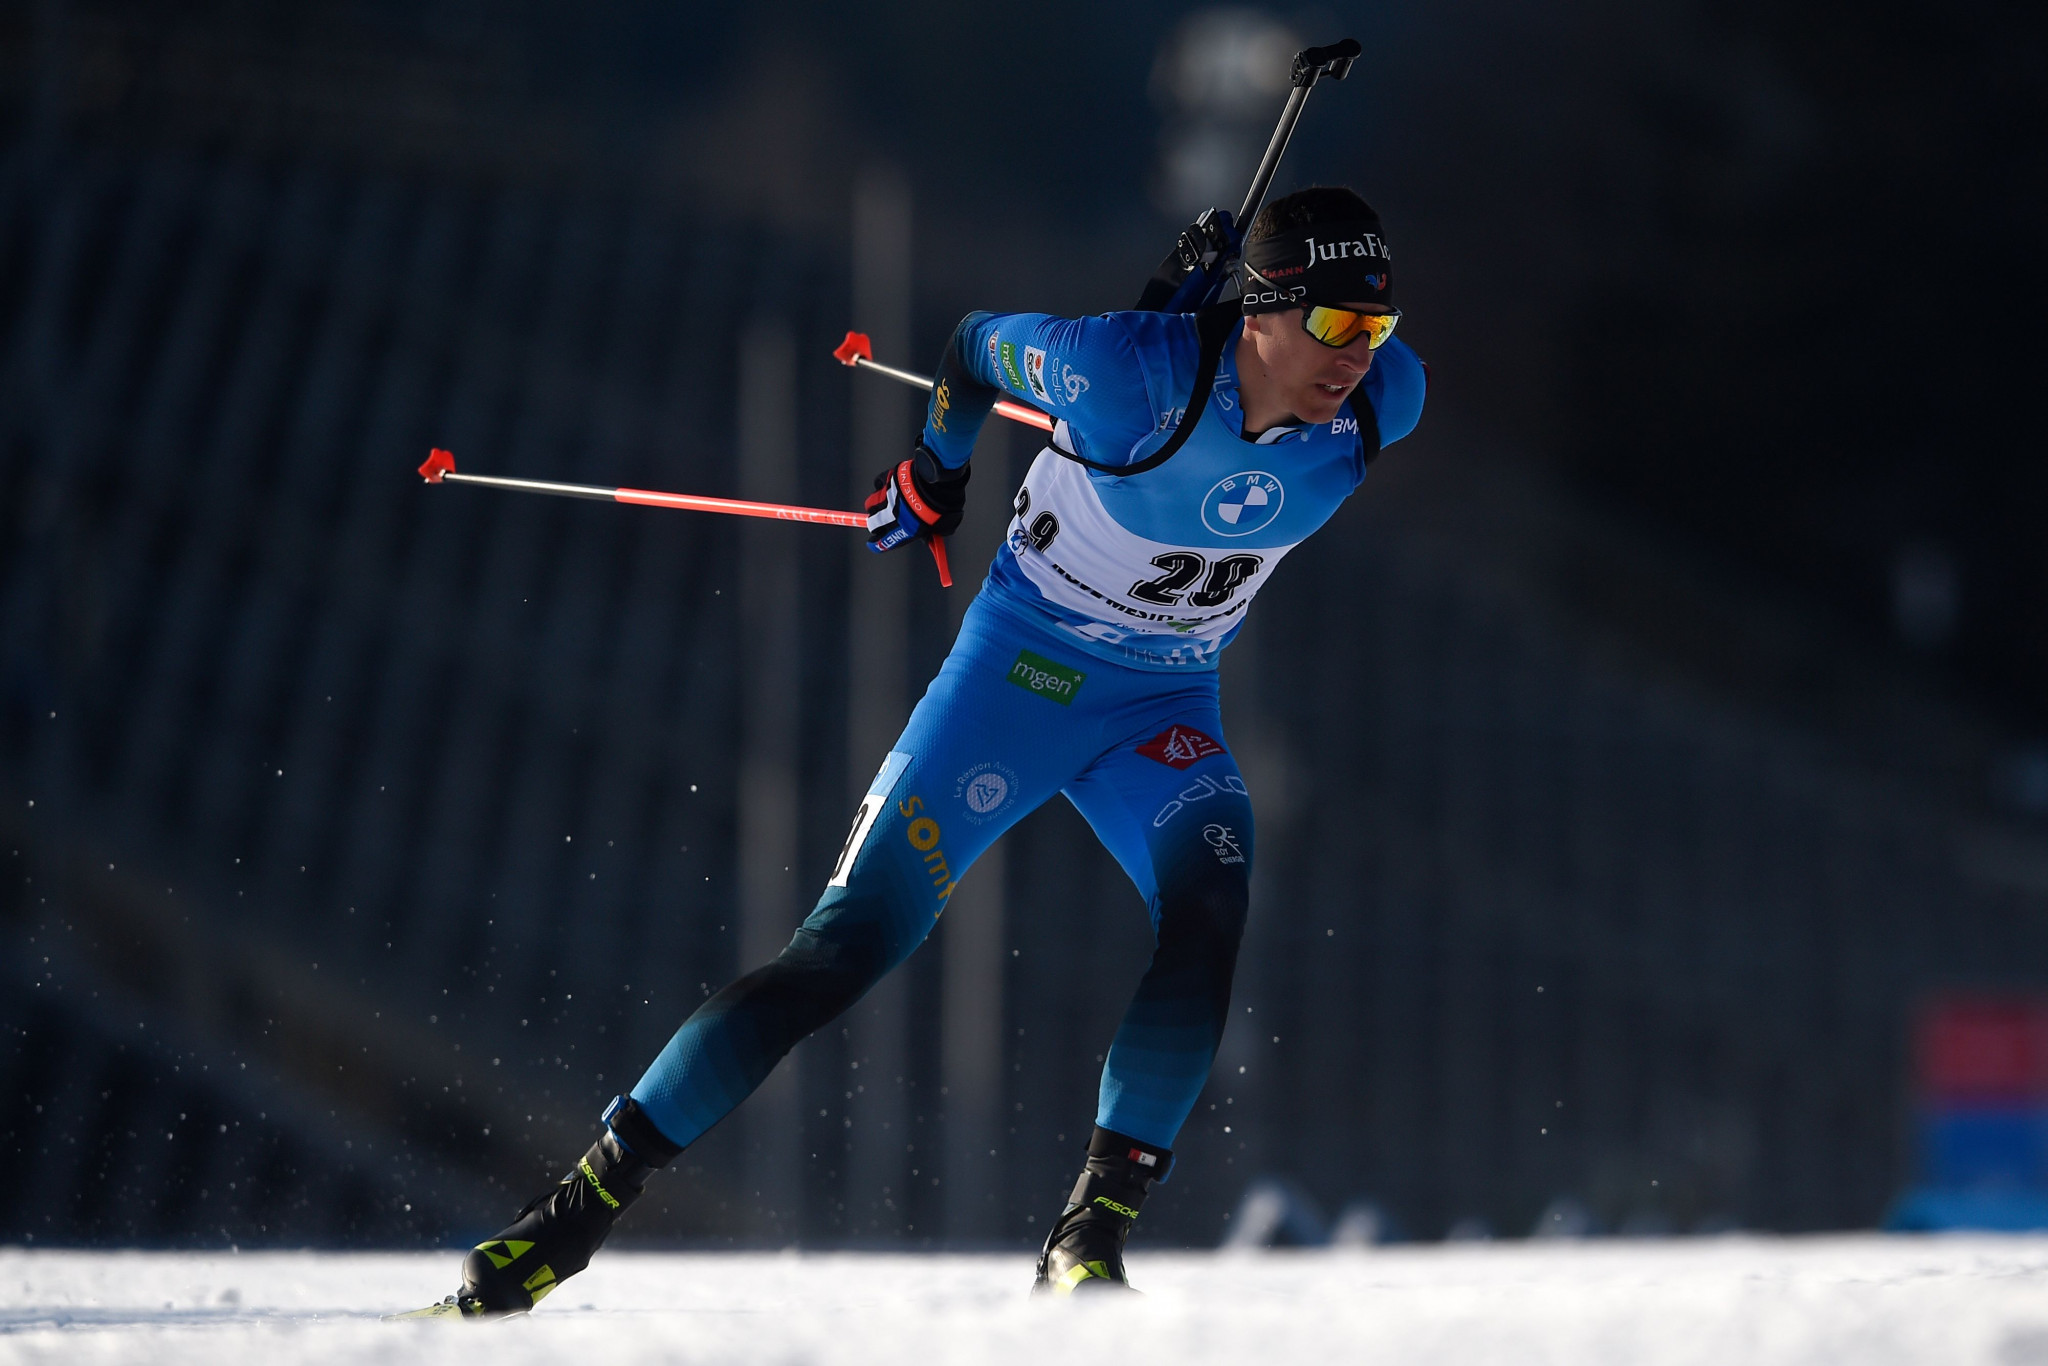 Fillon Maillet on target with sprint win at IBU Biathlon World Cup